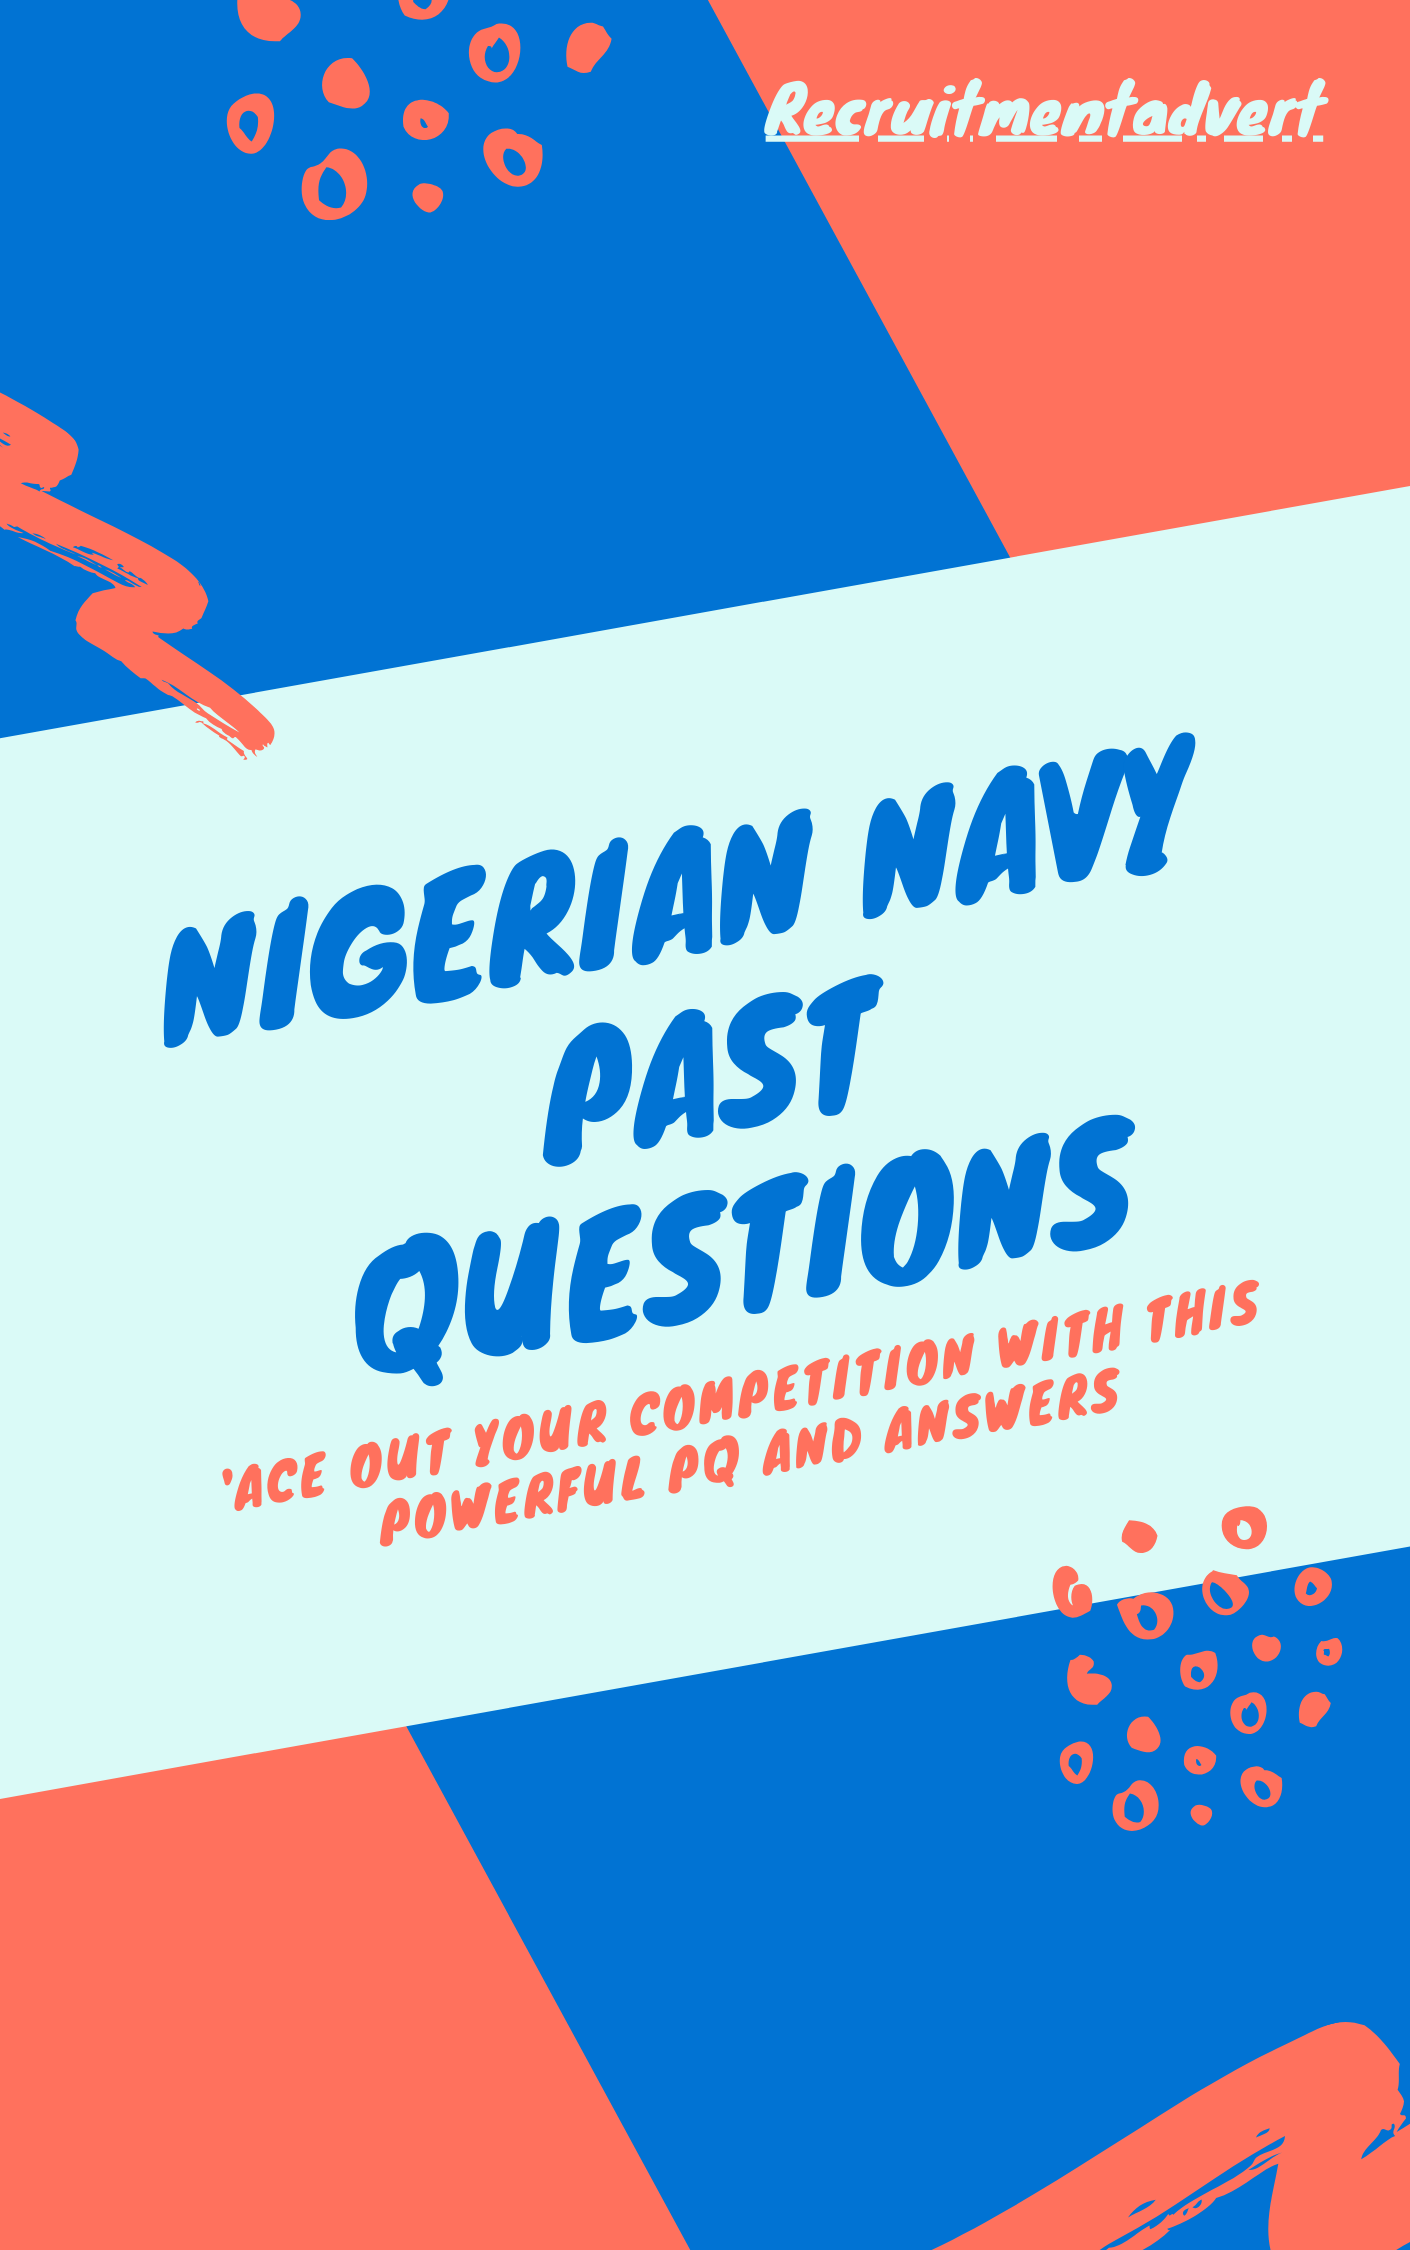 nigerian past questions and answers pdf file for download